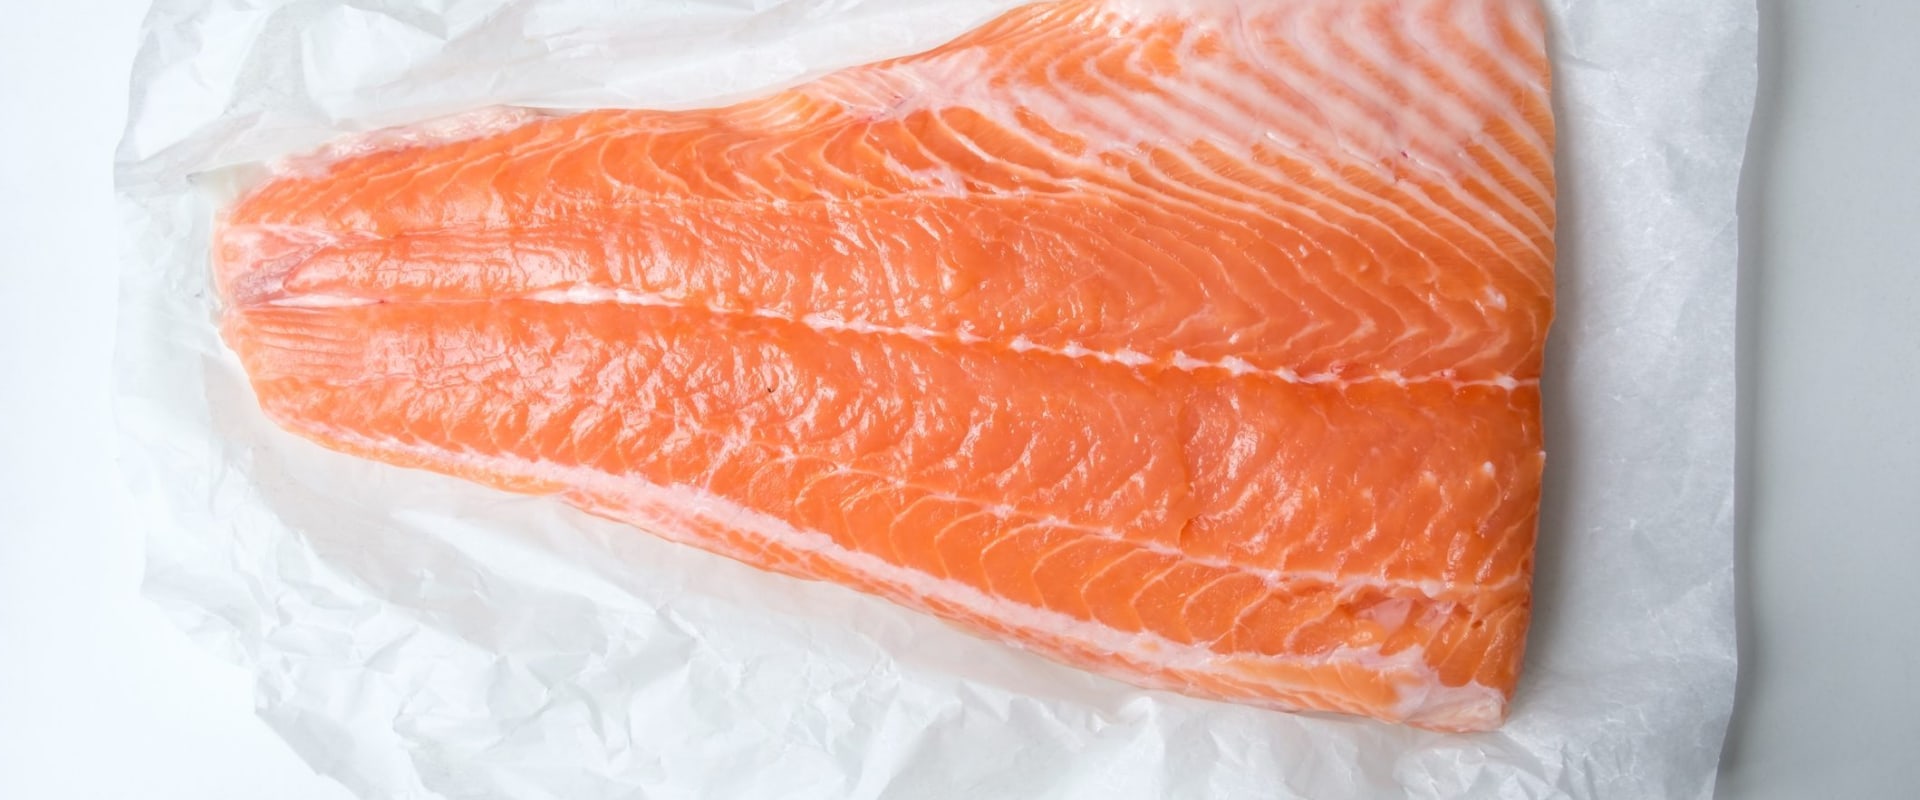 How to Tell if Salmon is Fresh or Not